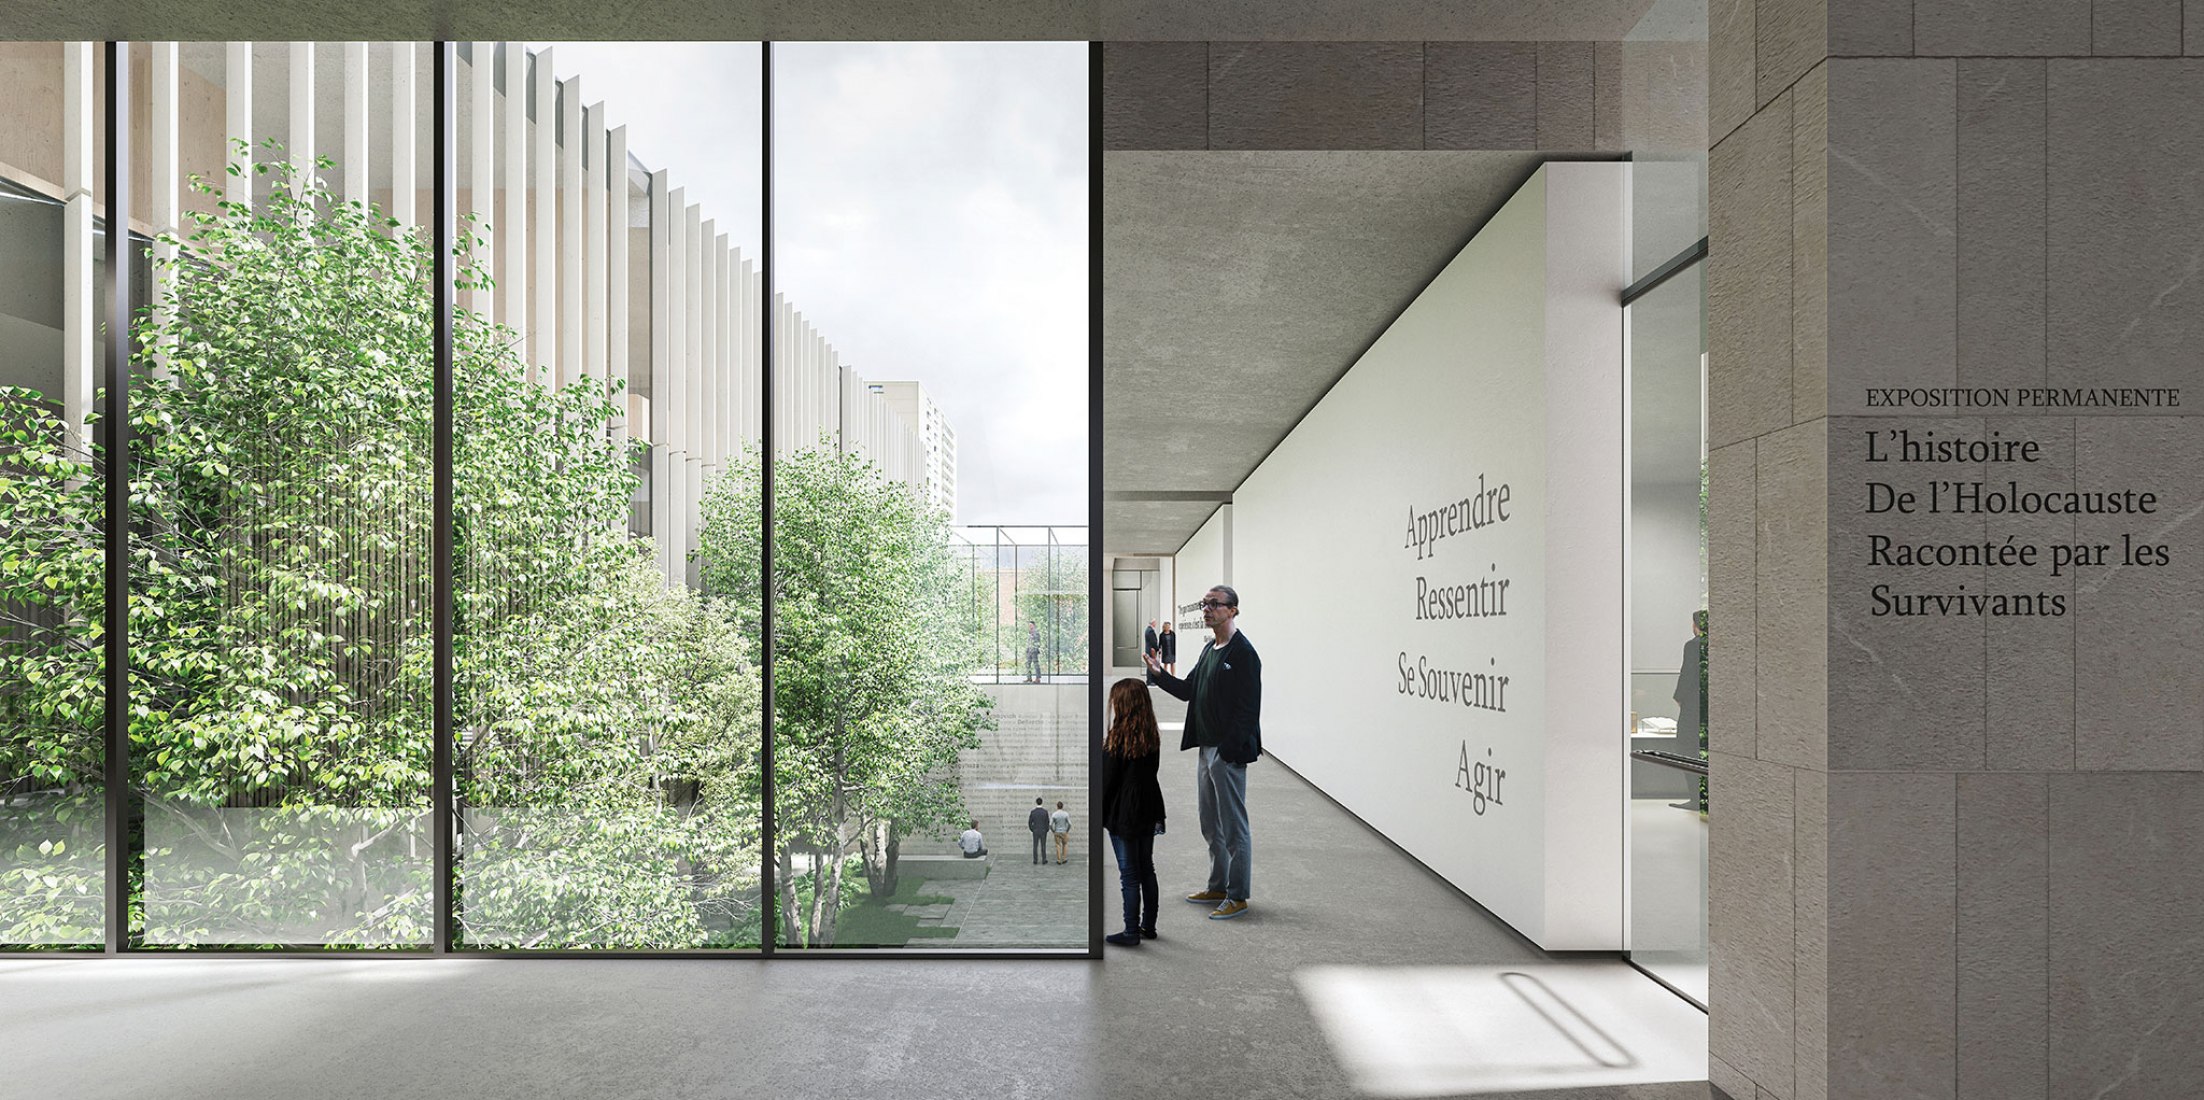 Montreal Holocaust Museum by KPMB Arch + Daoust Lestage Lizotte Stecker Arch.